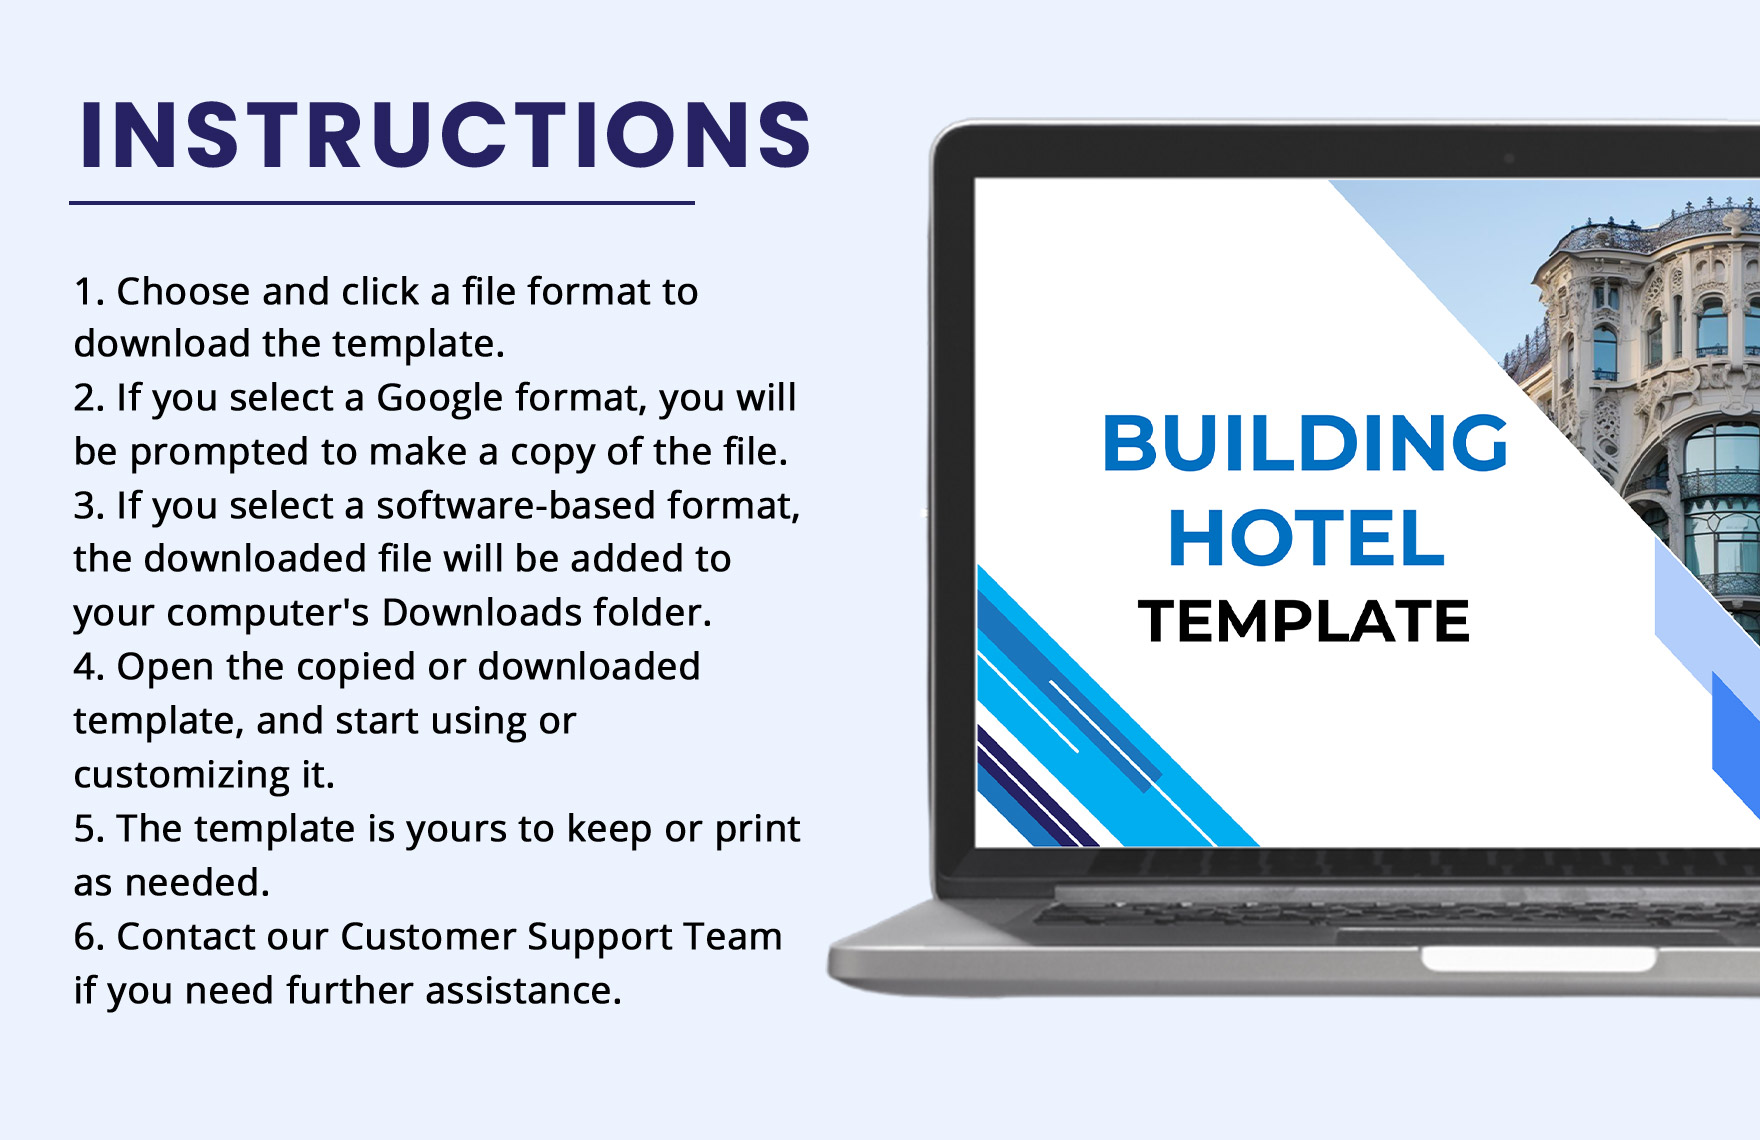 Building Hotel Template